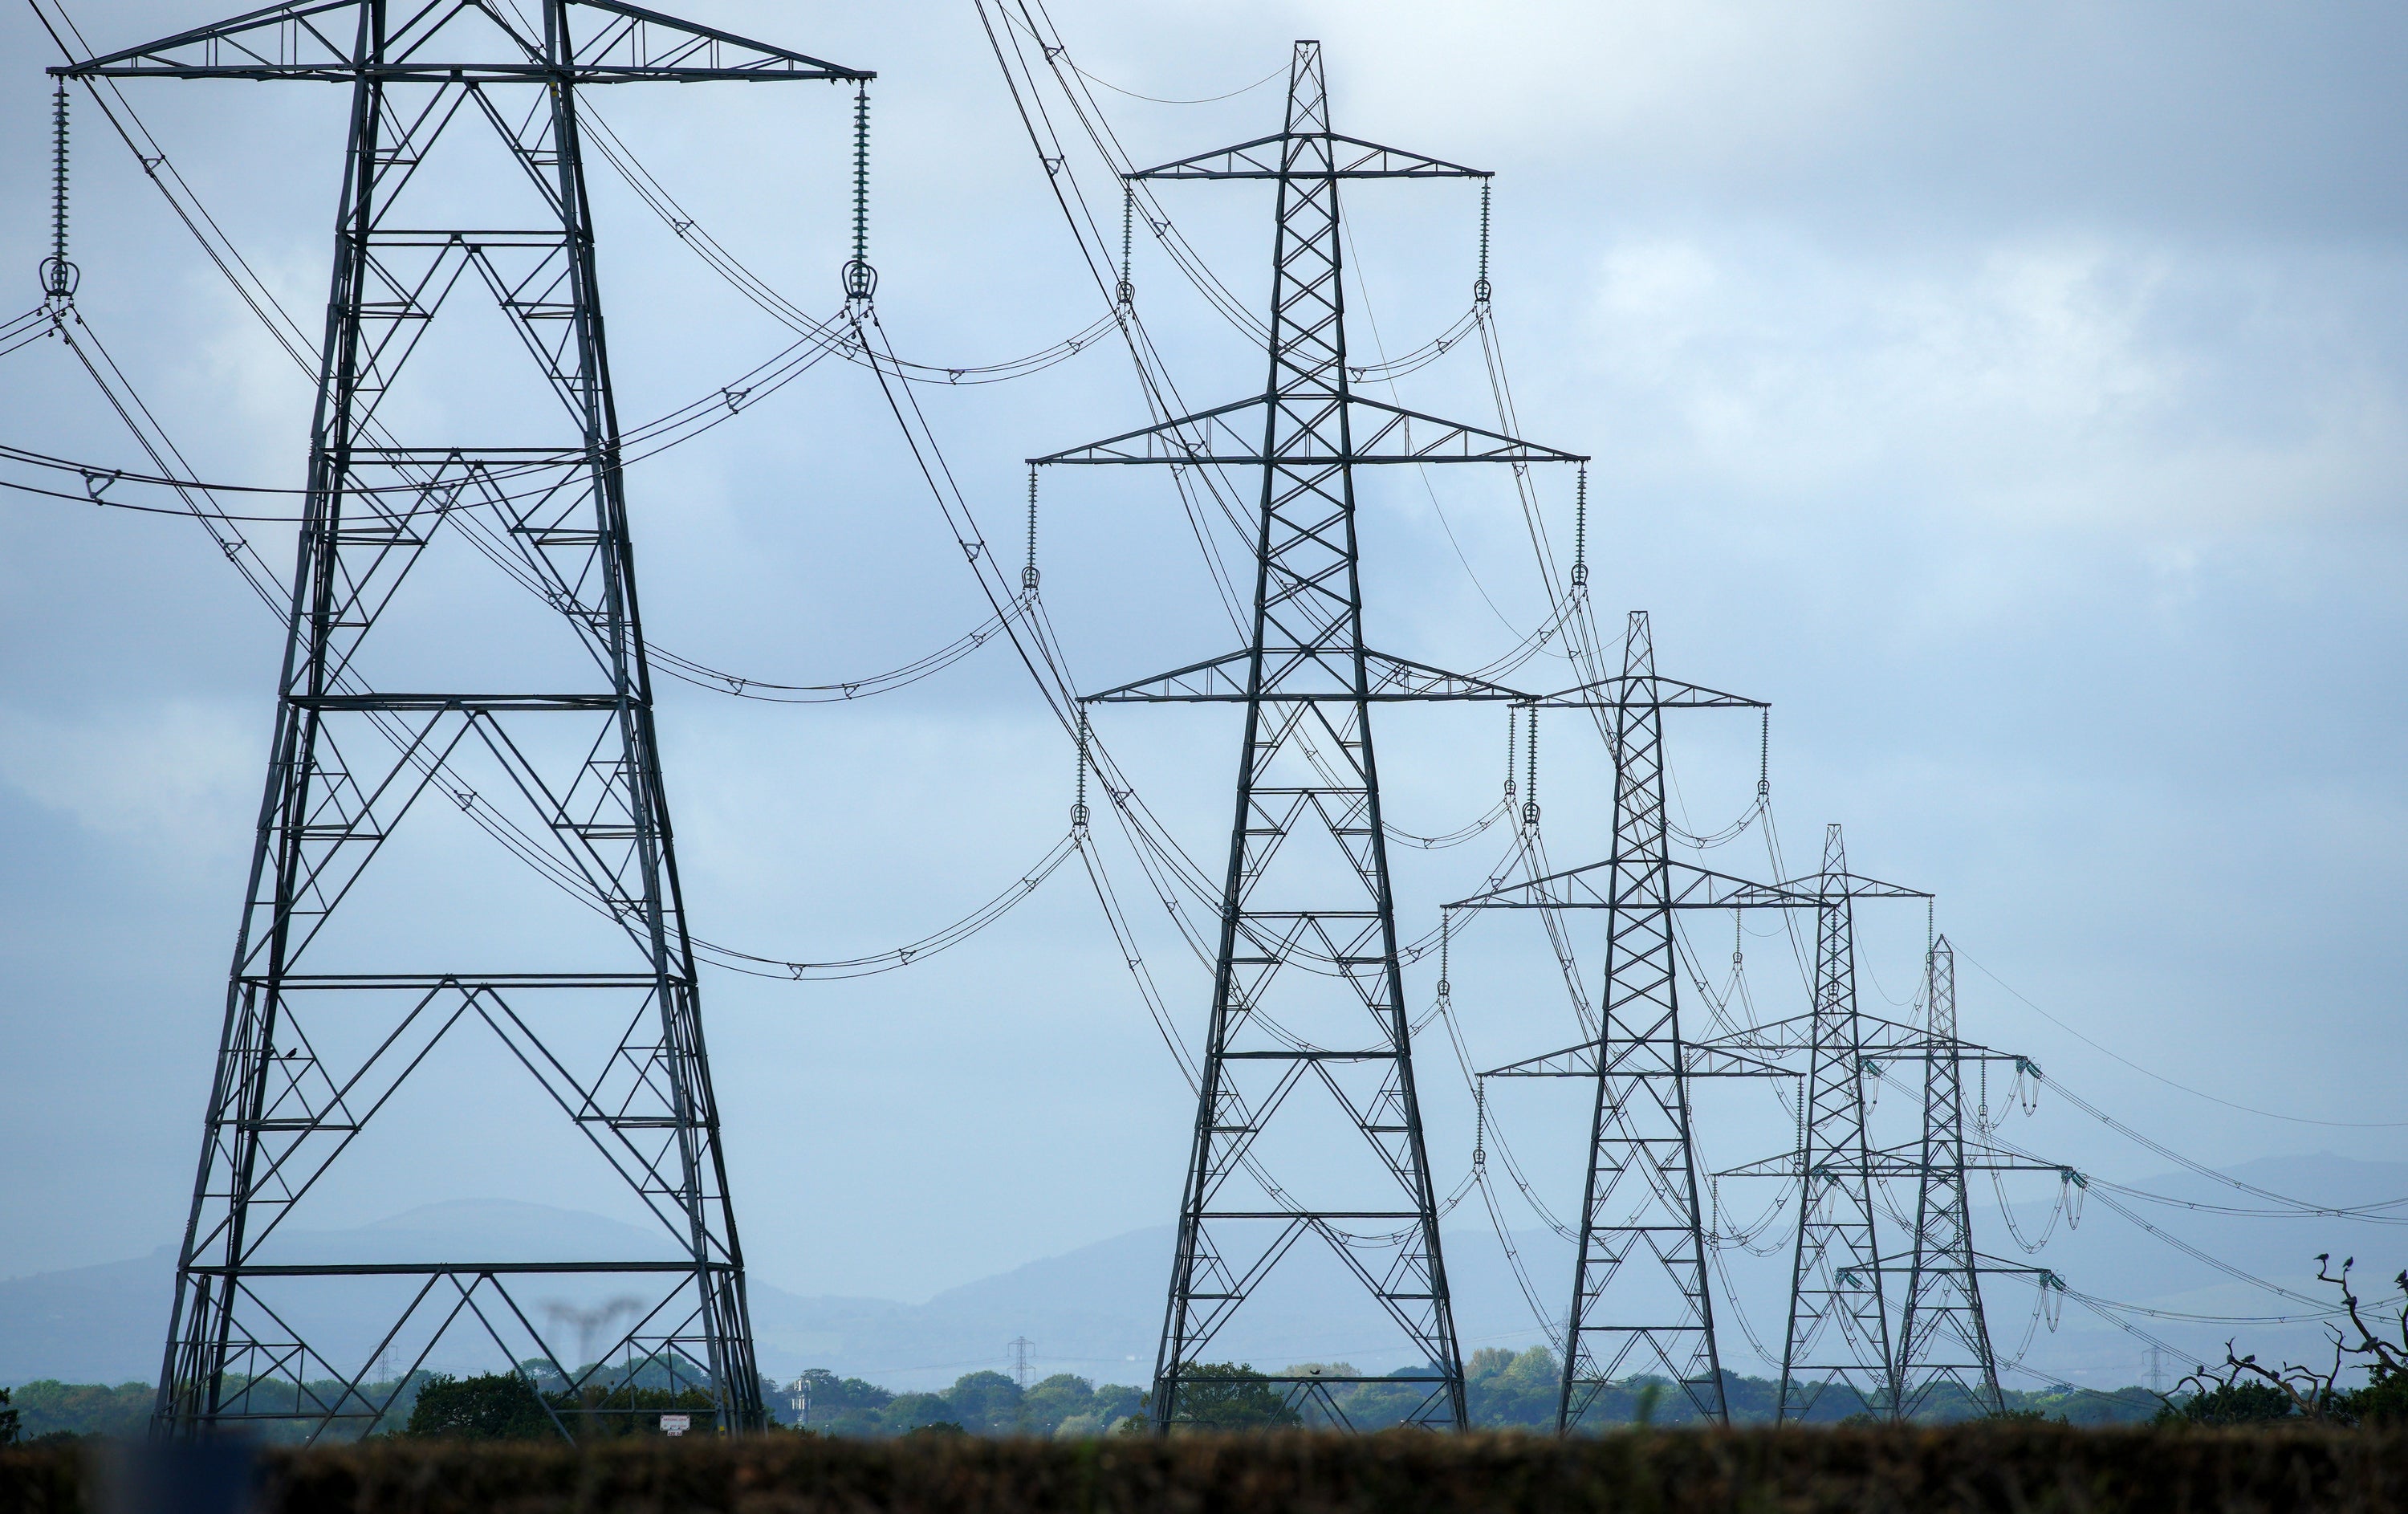 Western Power Distribution has agreed to pay £14.9 million after it failed to offer proper support during power cuts to some of its 1.7 million vulnerable customers (Peter Byrne/PA)